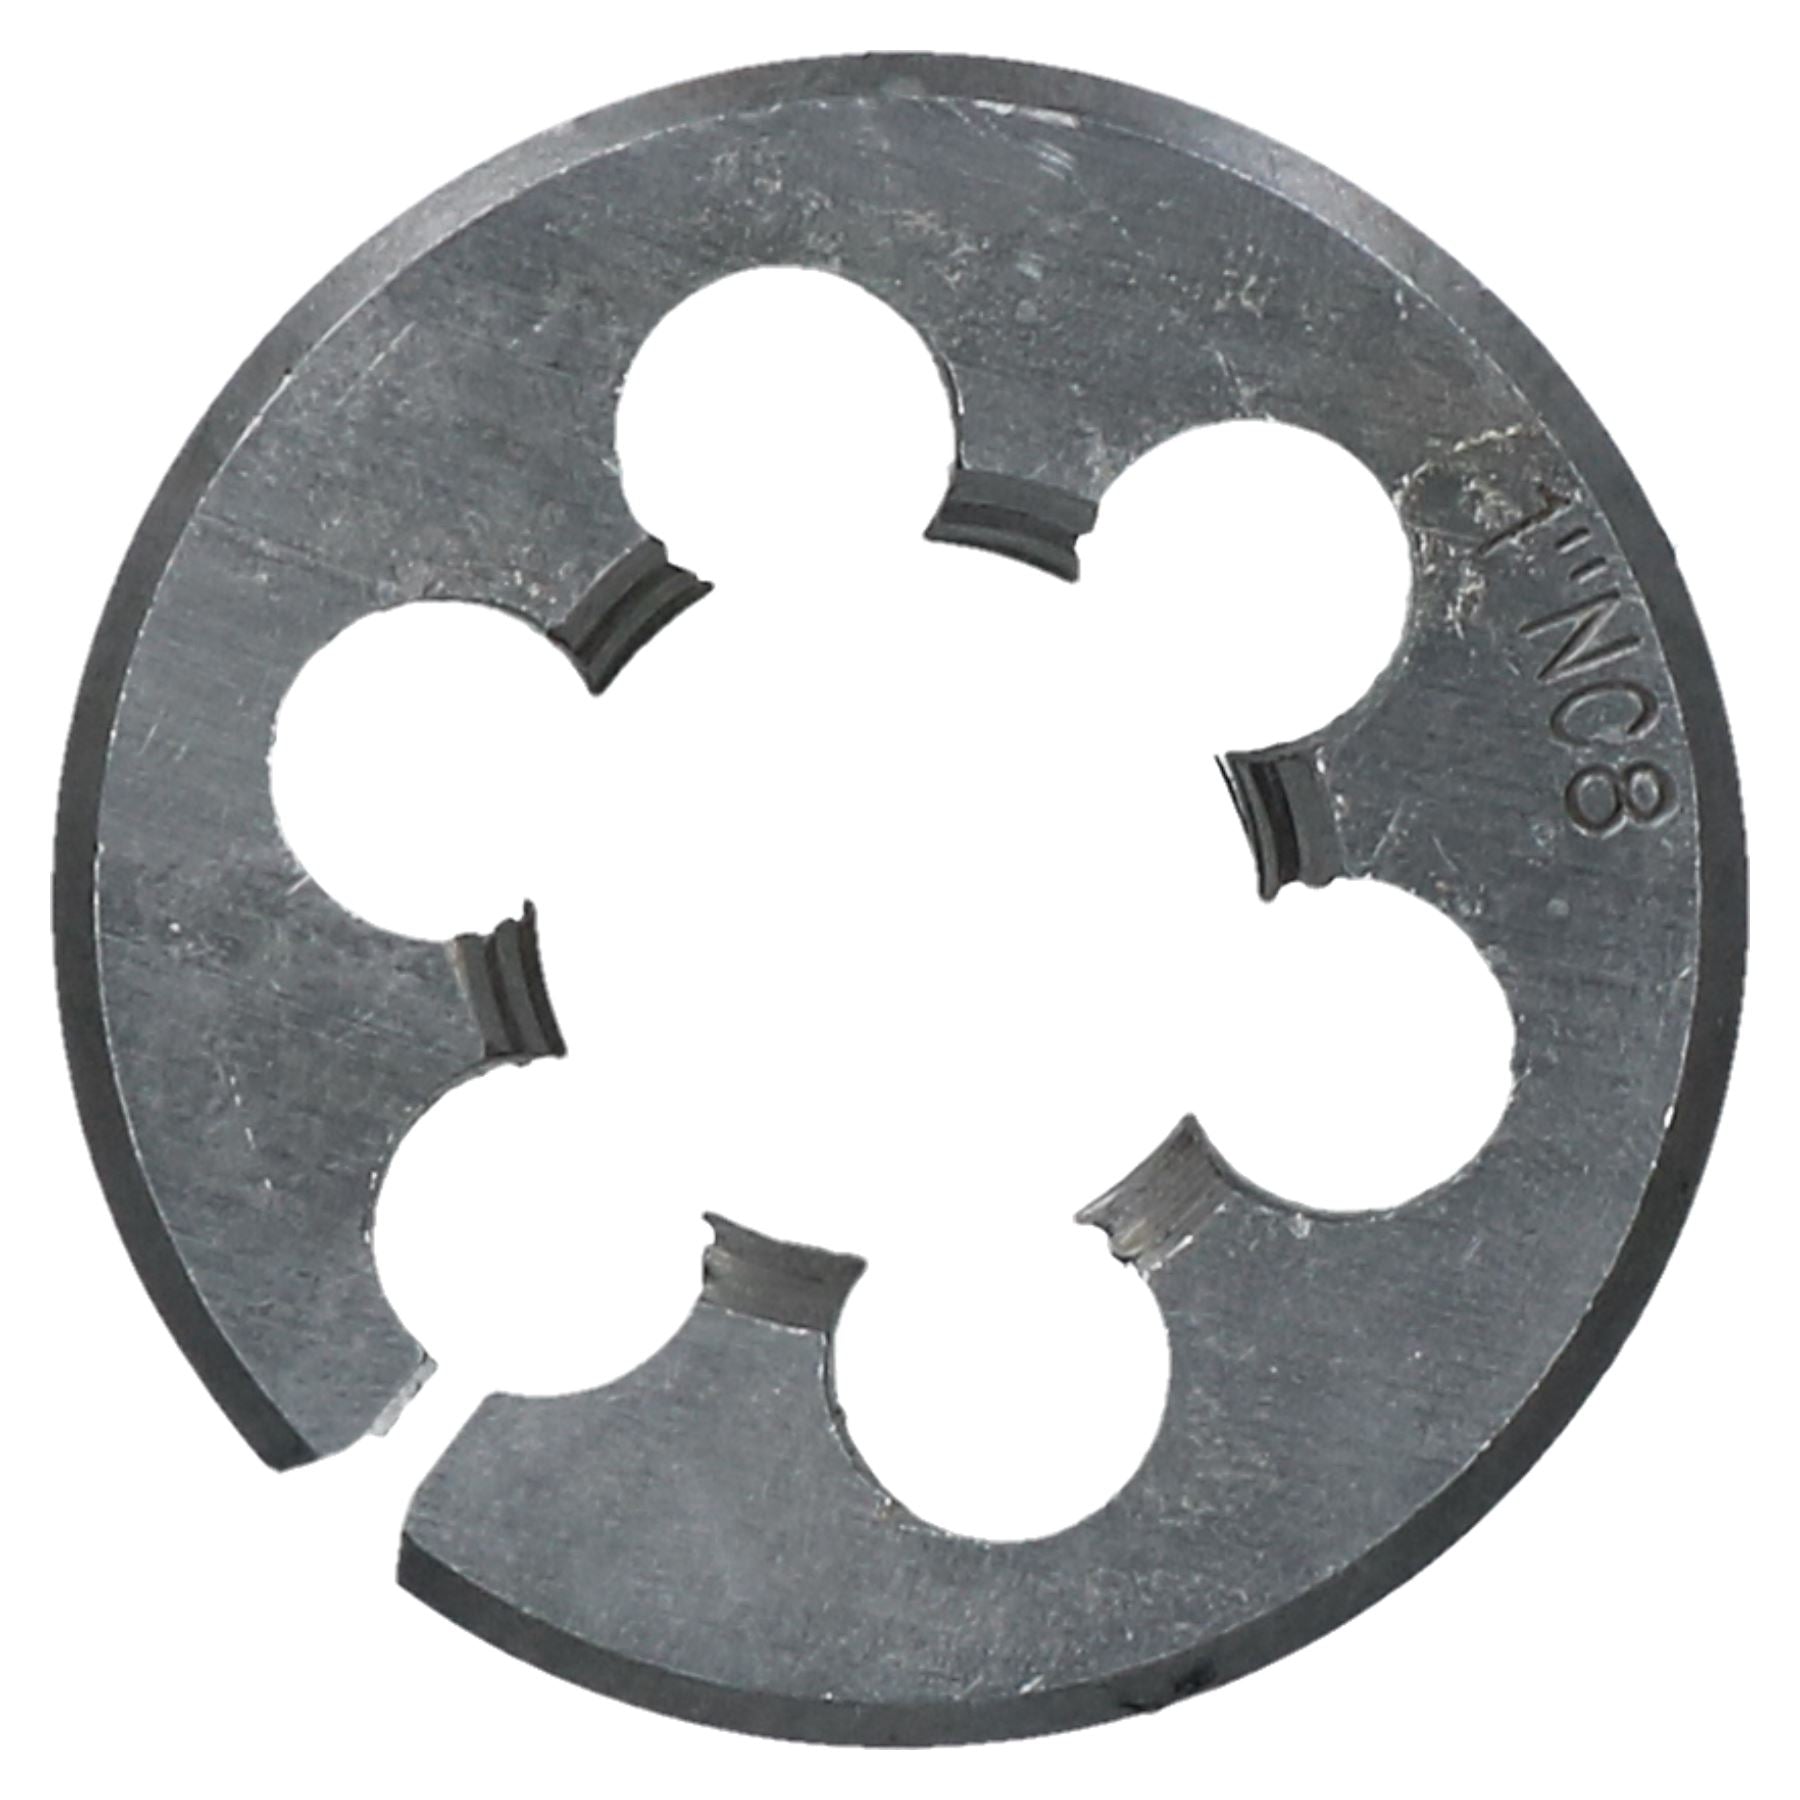 50mm UNC Imperial Die from 3/4" - 1"